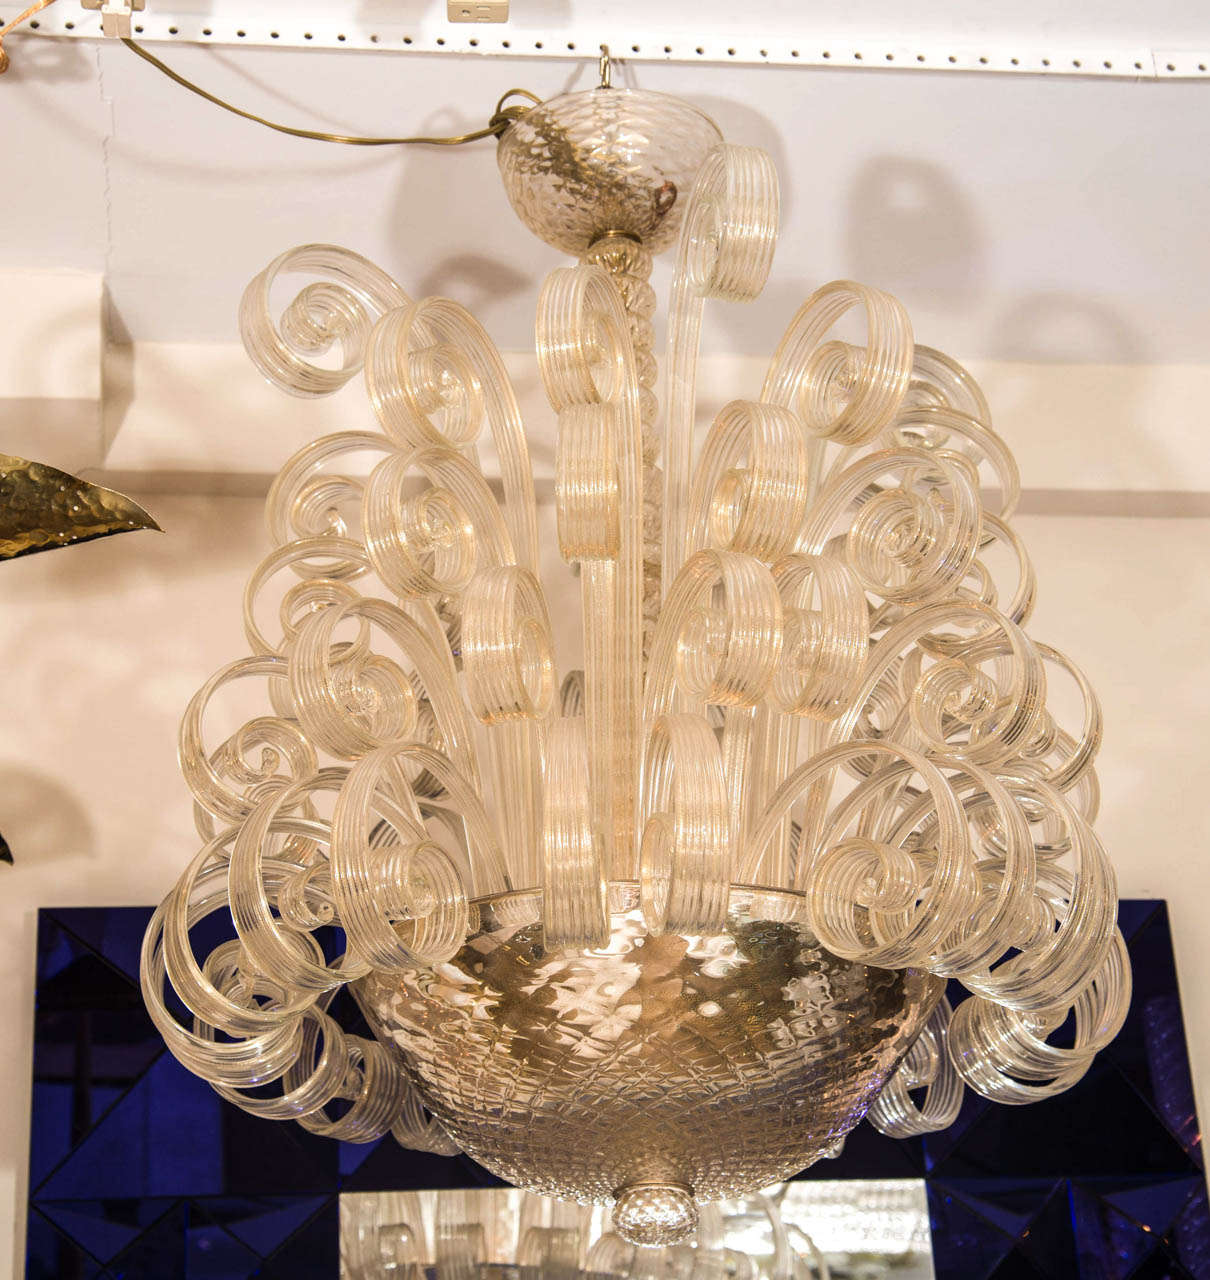 Murano glass chandelier composed of clear glass scrolling elements and mercury glass bowl.